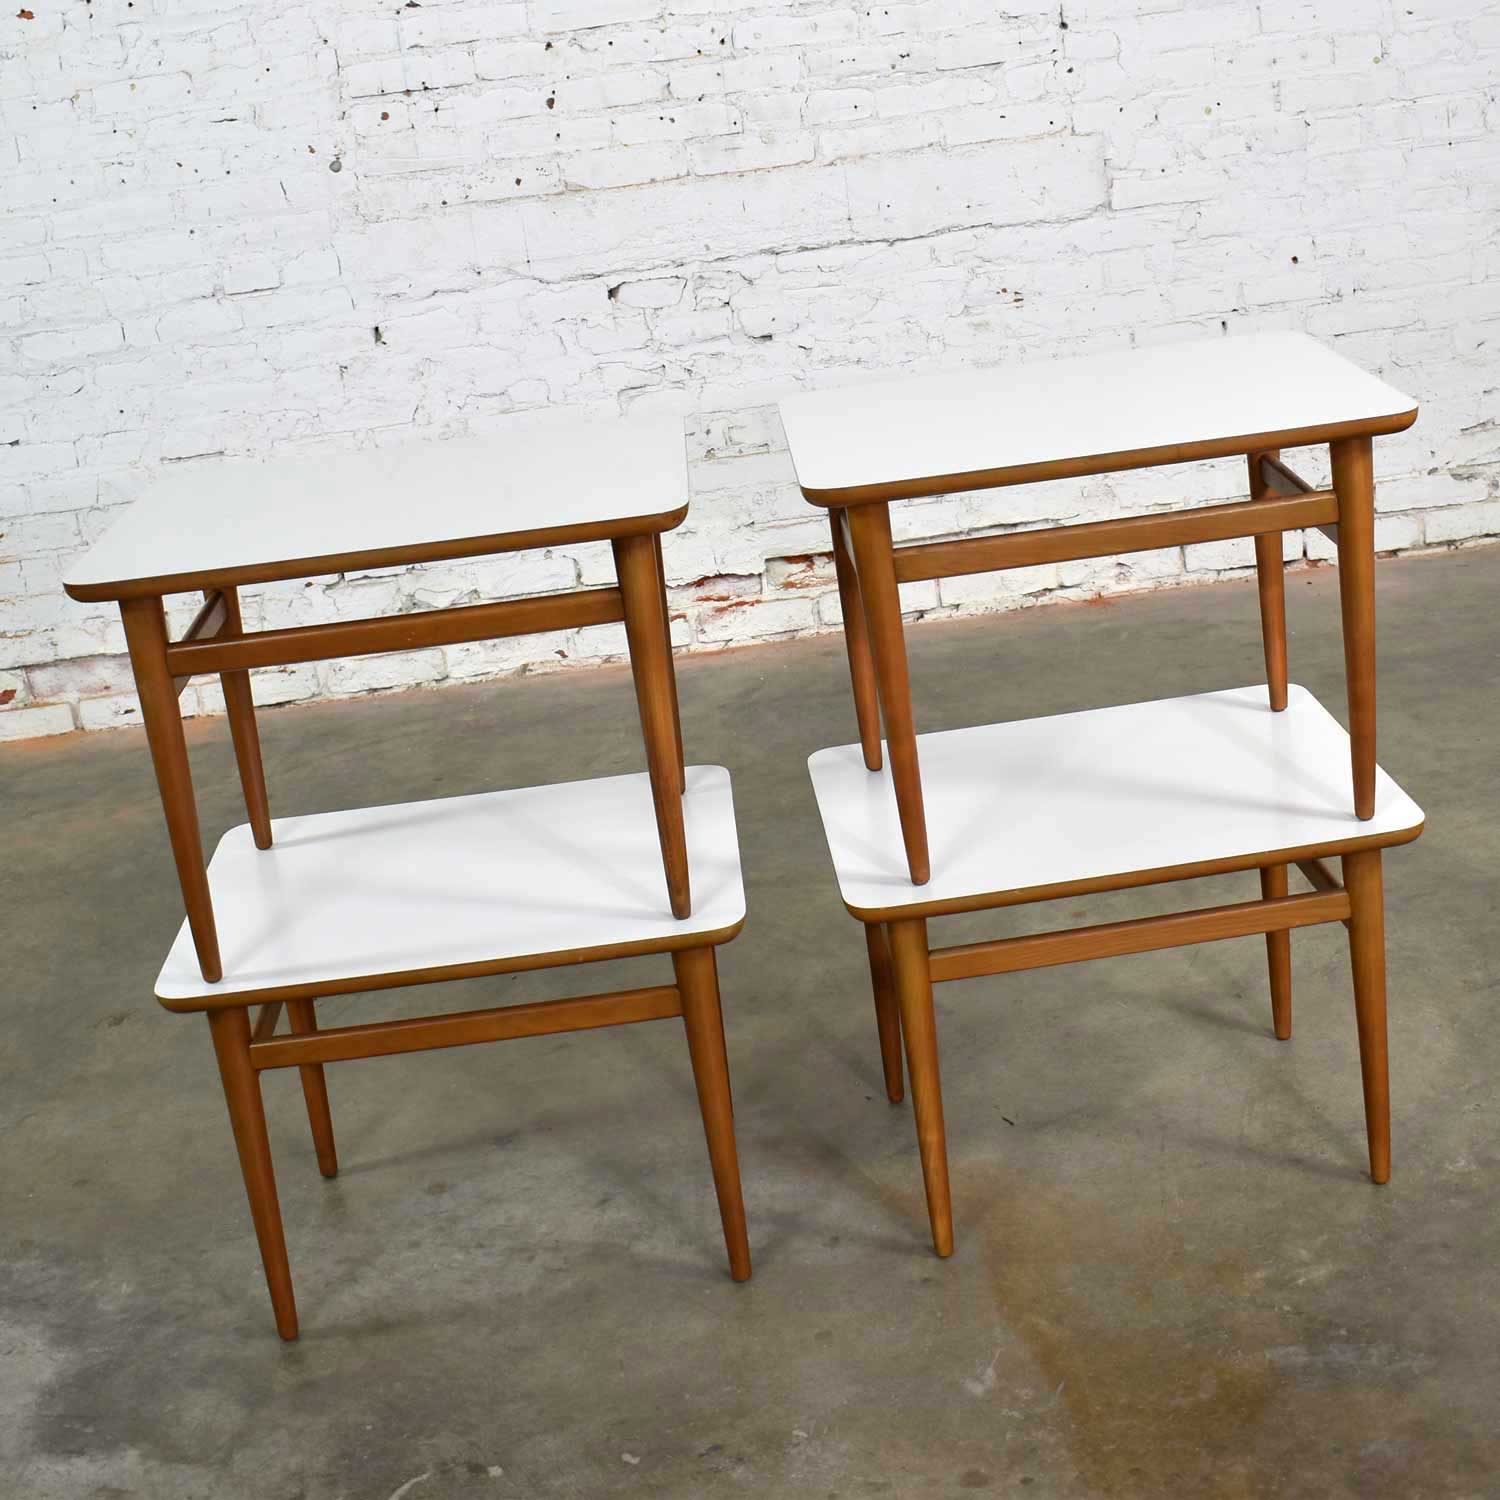 Set of 4 Mid Century Modern Birch Side Tables with White Laminate Tops & Tapered Legs